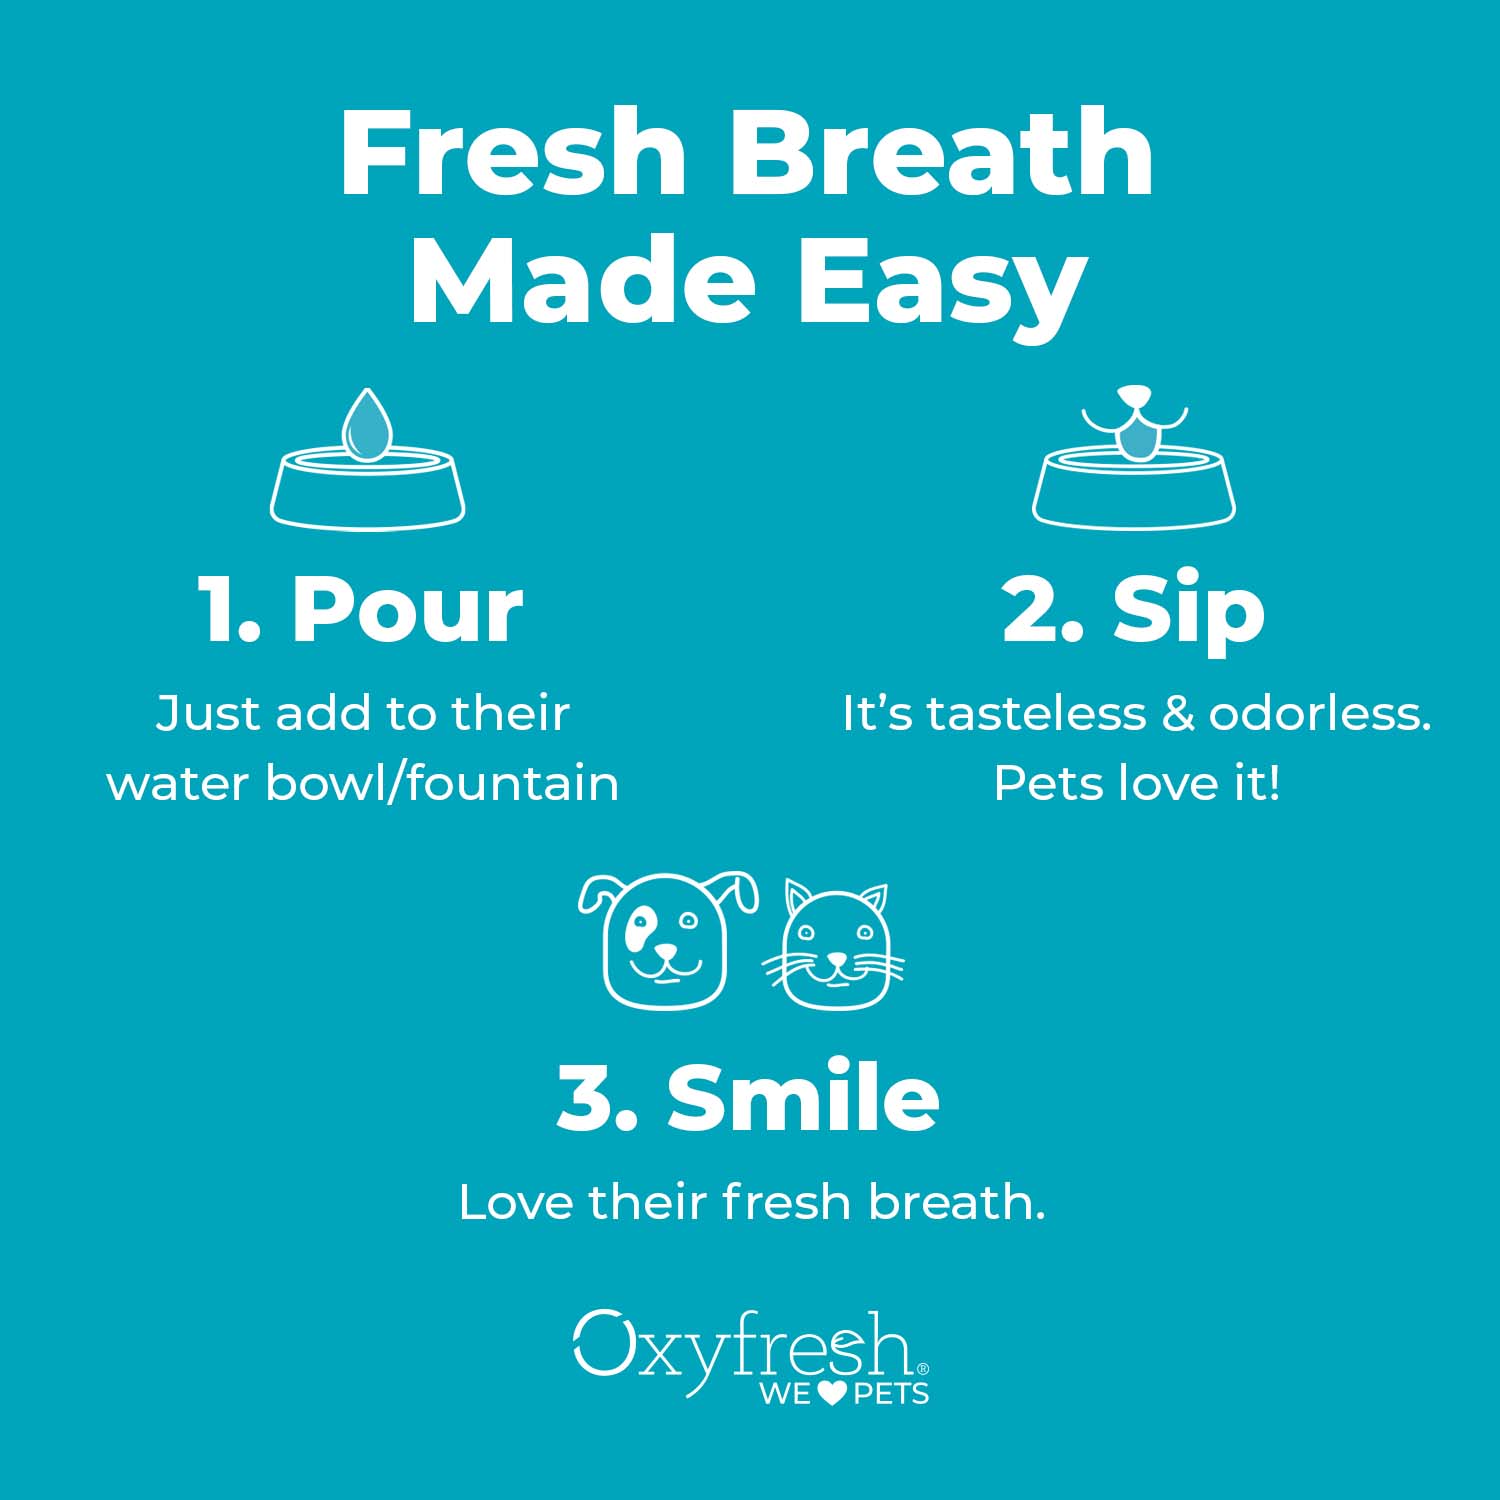 oxyfresh pet water additive graphic that says fresh breath made easy 1. pour 2. pet sips 3. love their fresh breath